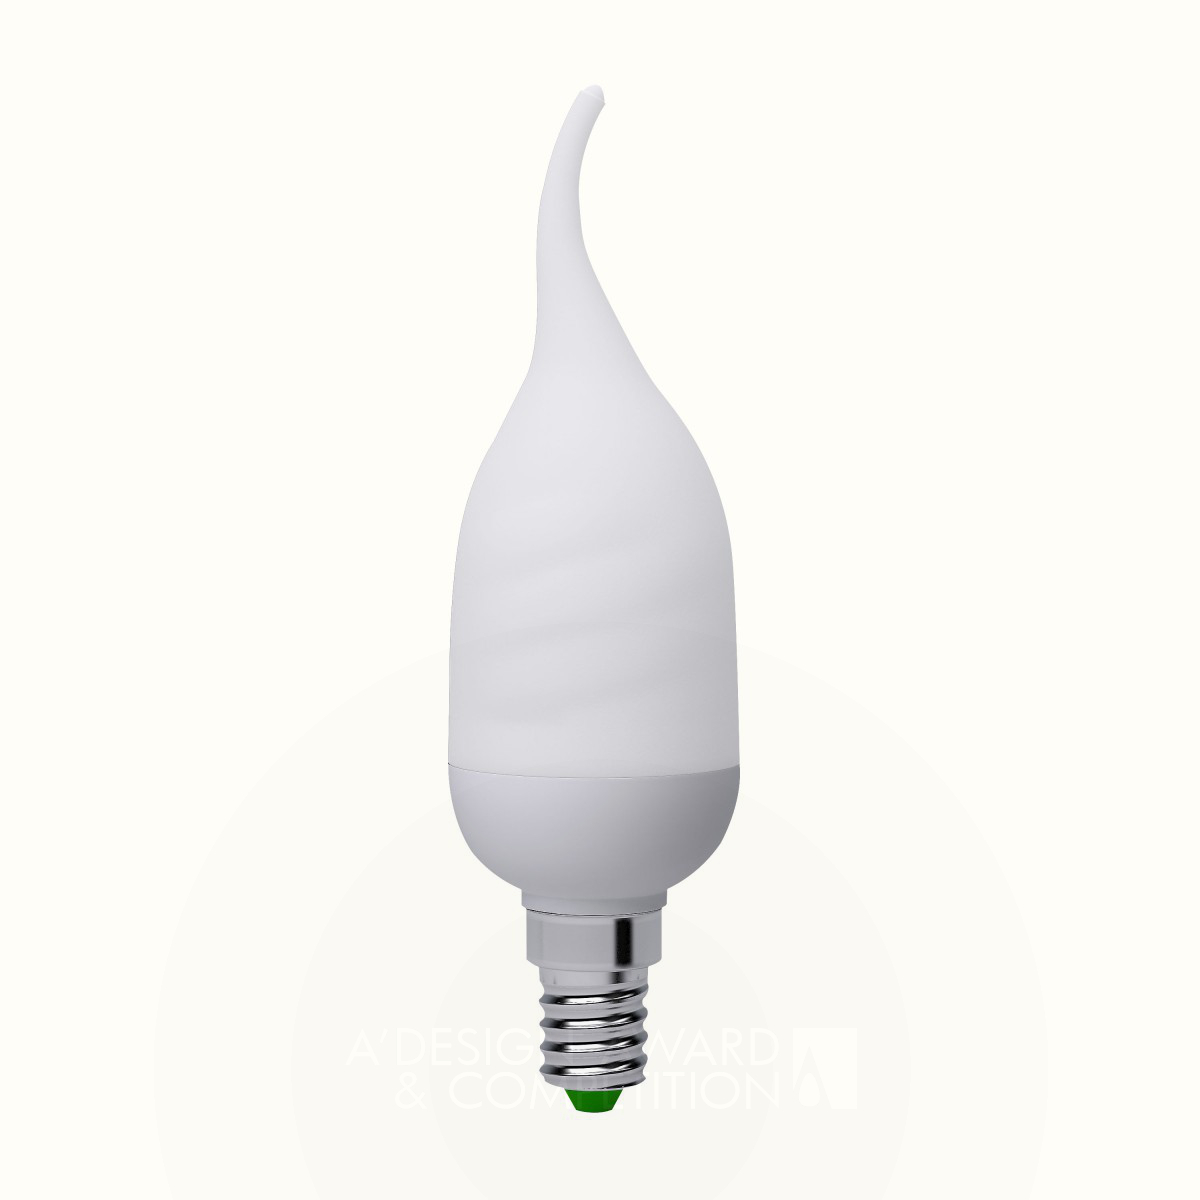 Dahom CFL Candle Energy Saving Candle Lamp  by Dahom